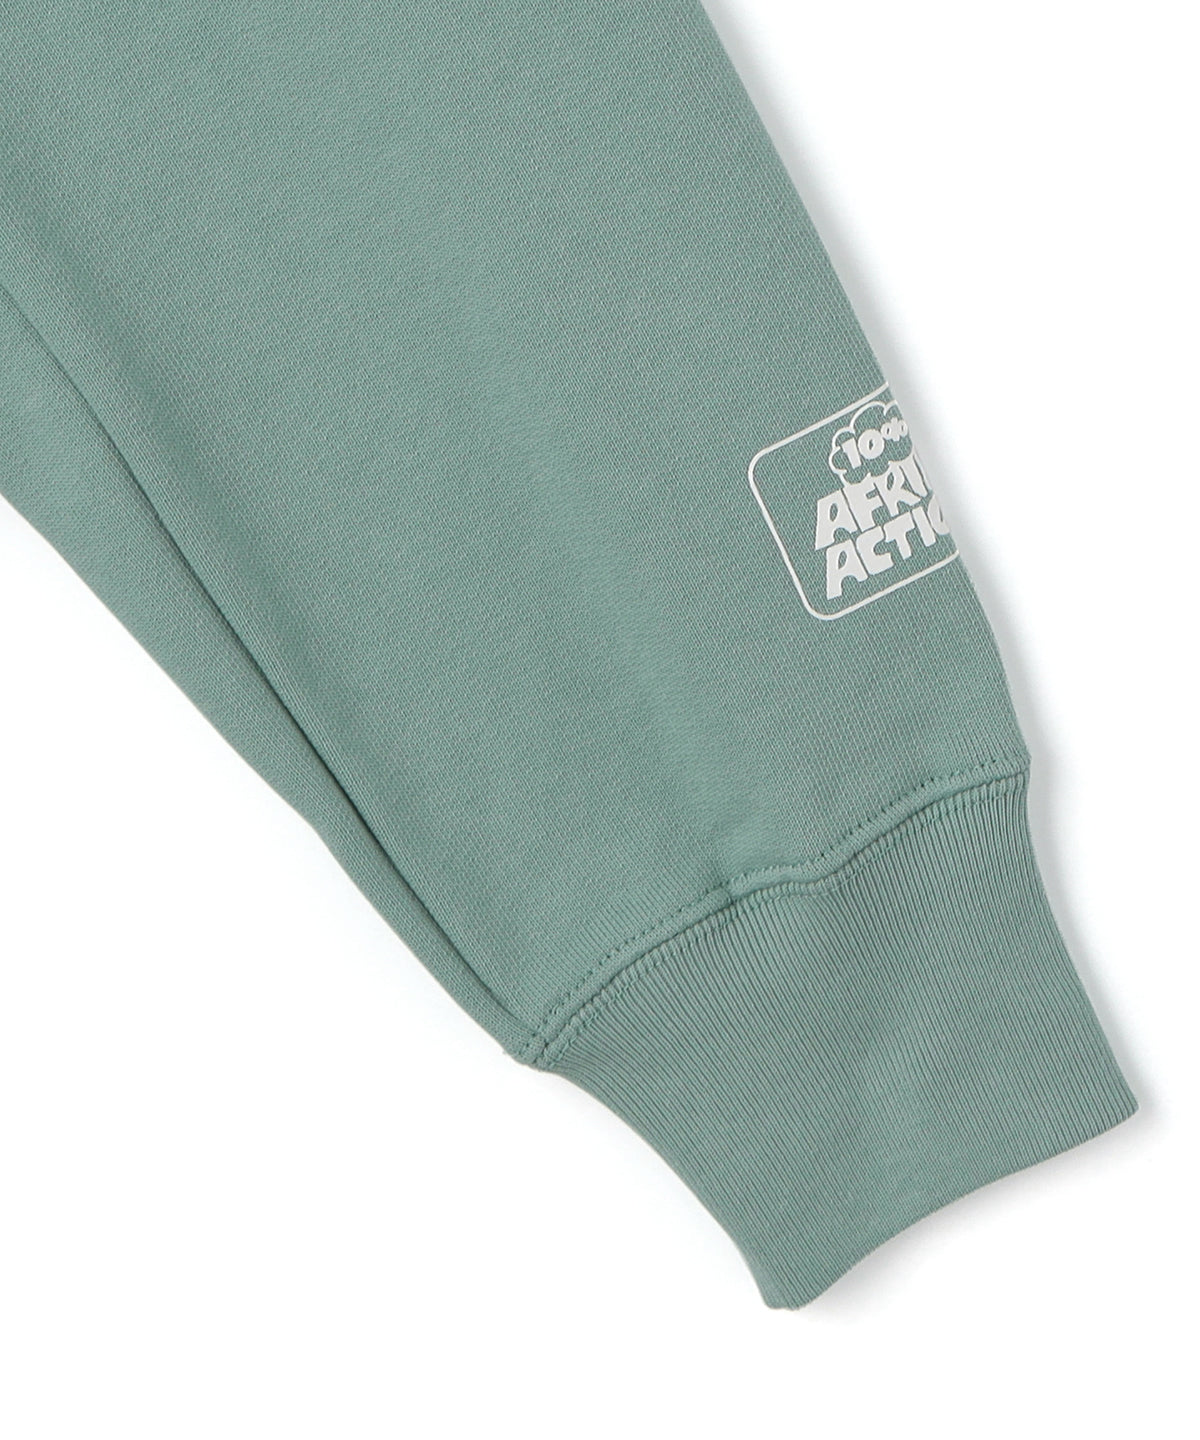 Sweat Shirts All Colors Are Beautiful ICE GREEN